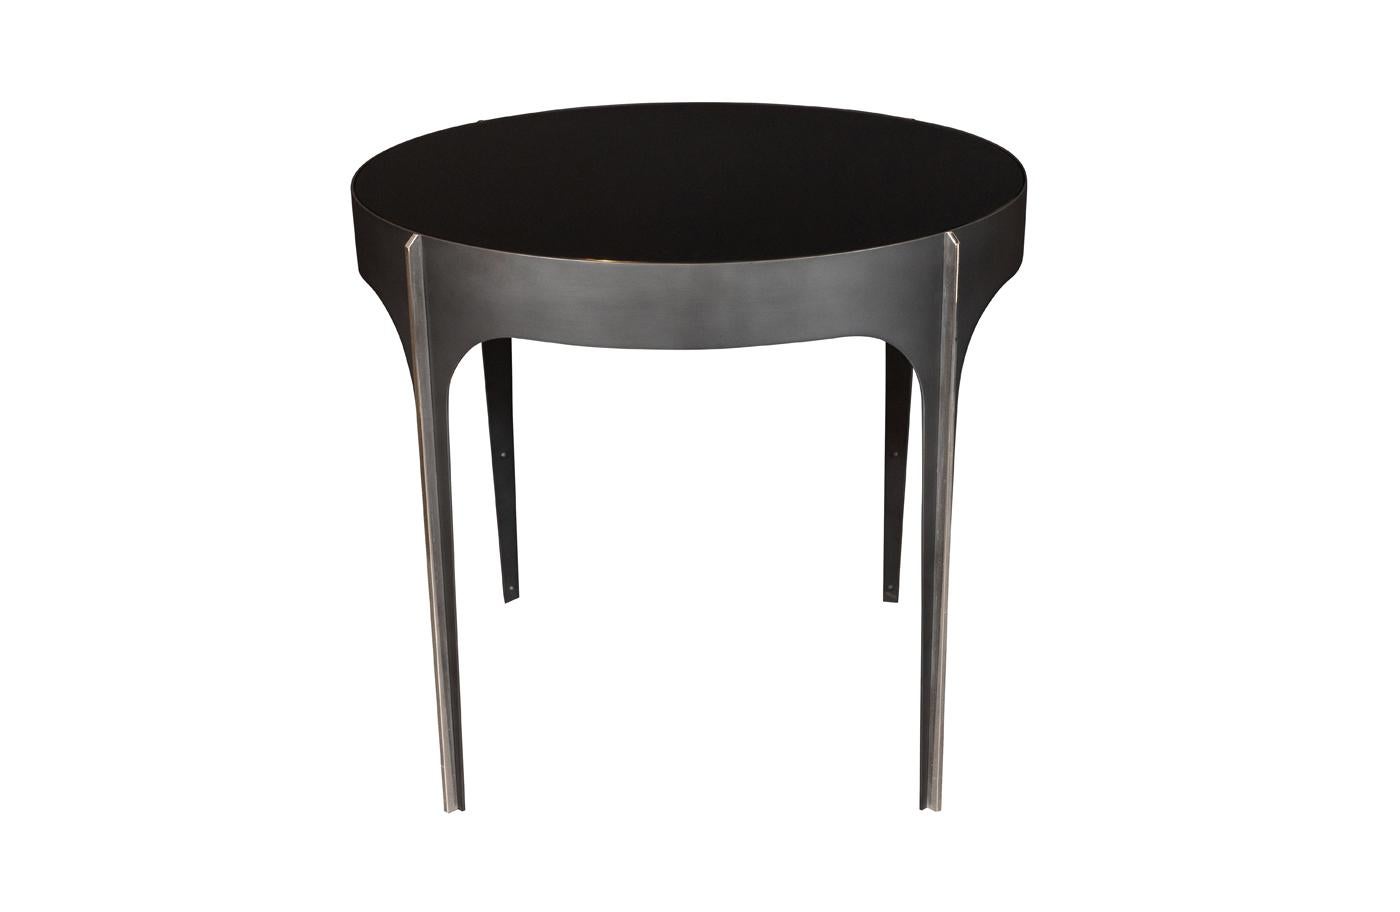 Blackened steel with polished nickel detail and reverse painted black glass inset top.